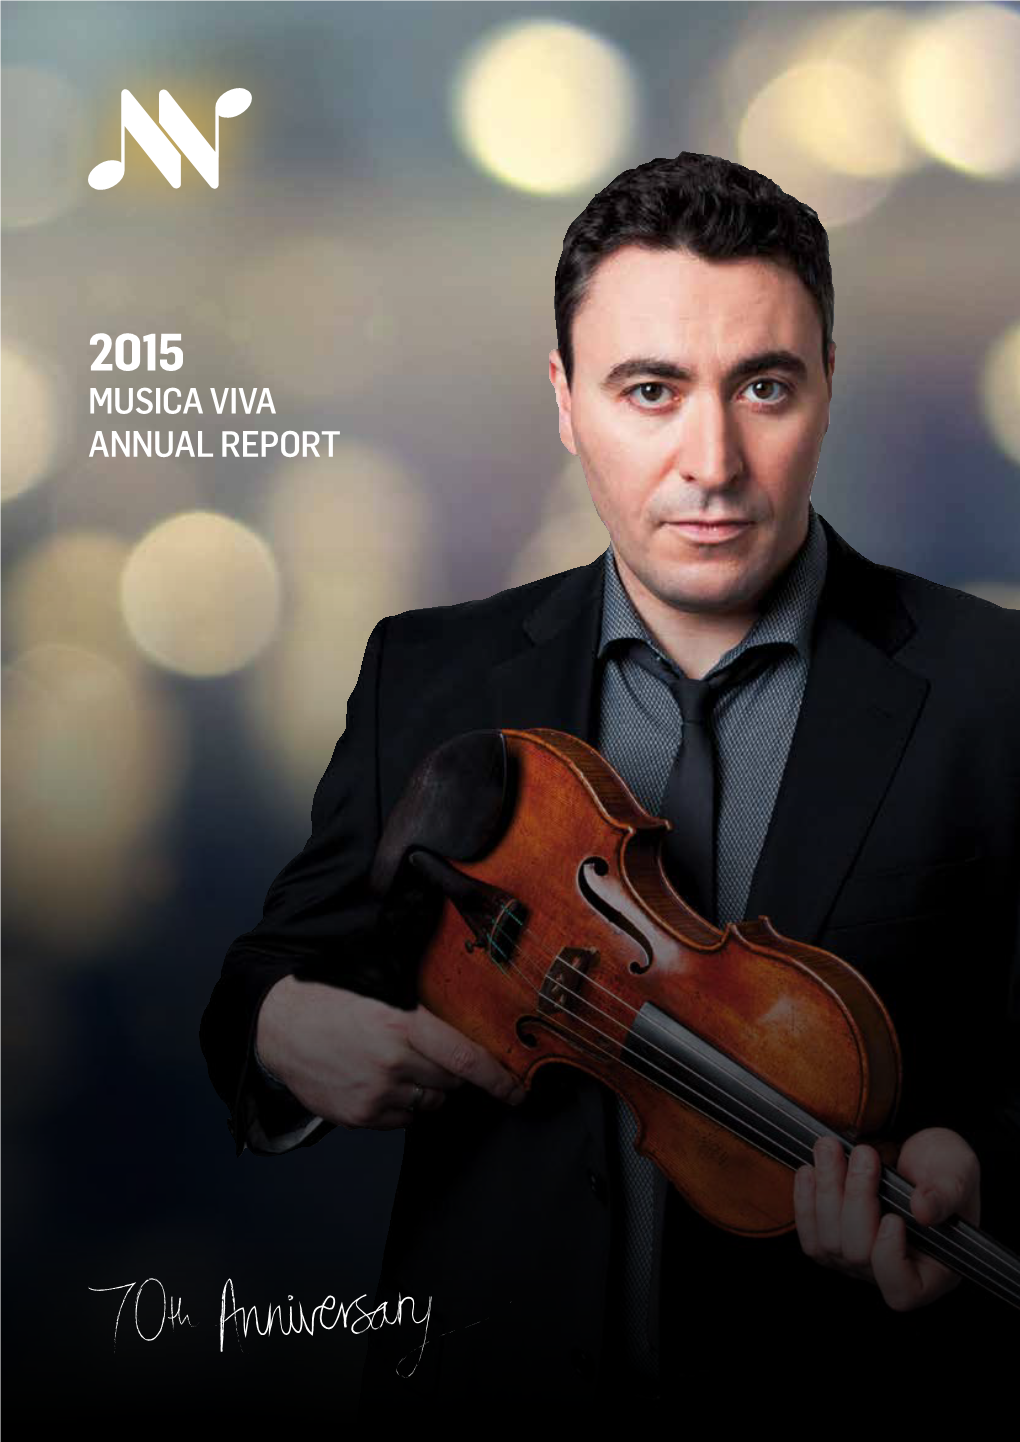 MUSICA VIVA ANNUAL REPORT “In 1945 the Romanian-Born Jewish Immigrant Richard Goldner Founded Sydney Musica Viva to Promote Chamber Music in His Adoptive Home